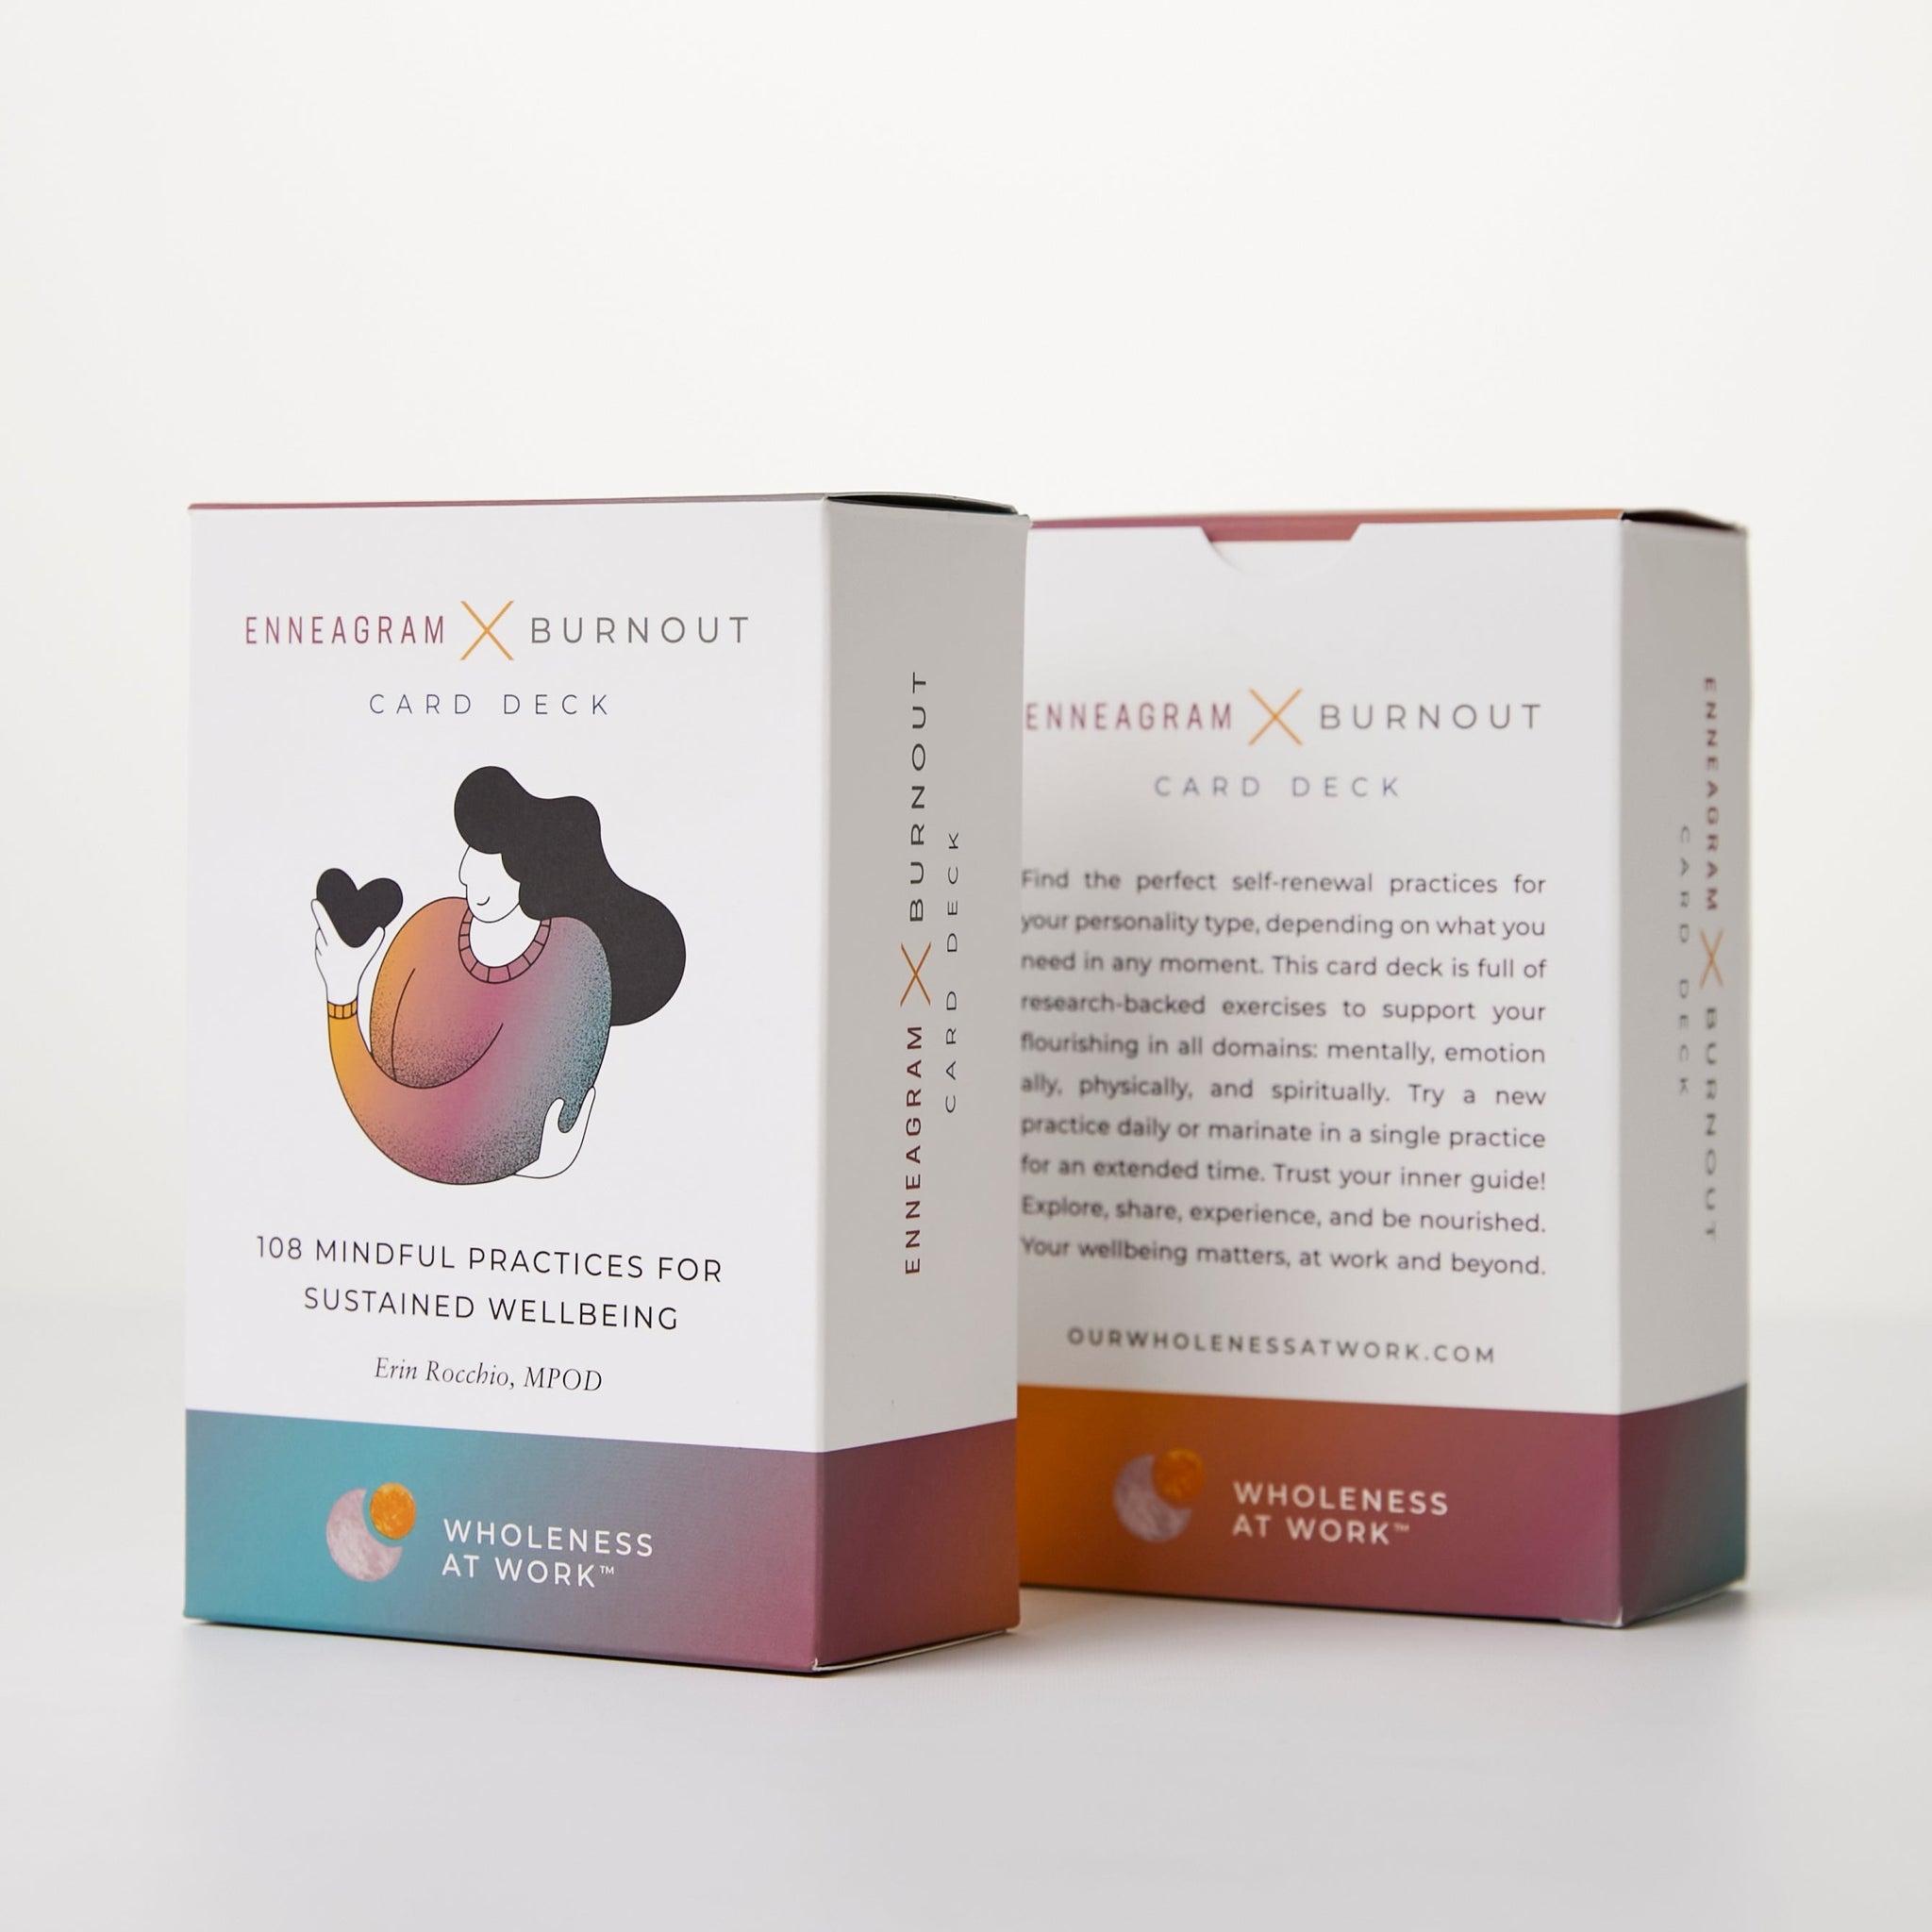 Enneagram X Burnout Card Deck: 108 Unique Mindful Practices for Sustained Well-being in Mind, Body, Heart, and Spirit. 20% Off Through 12/8 With Code: WHOLE20